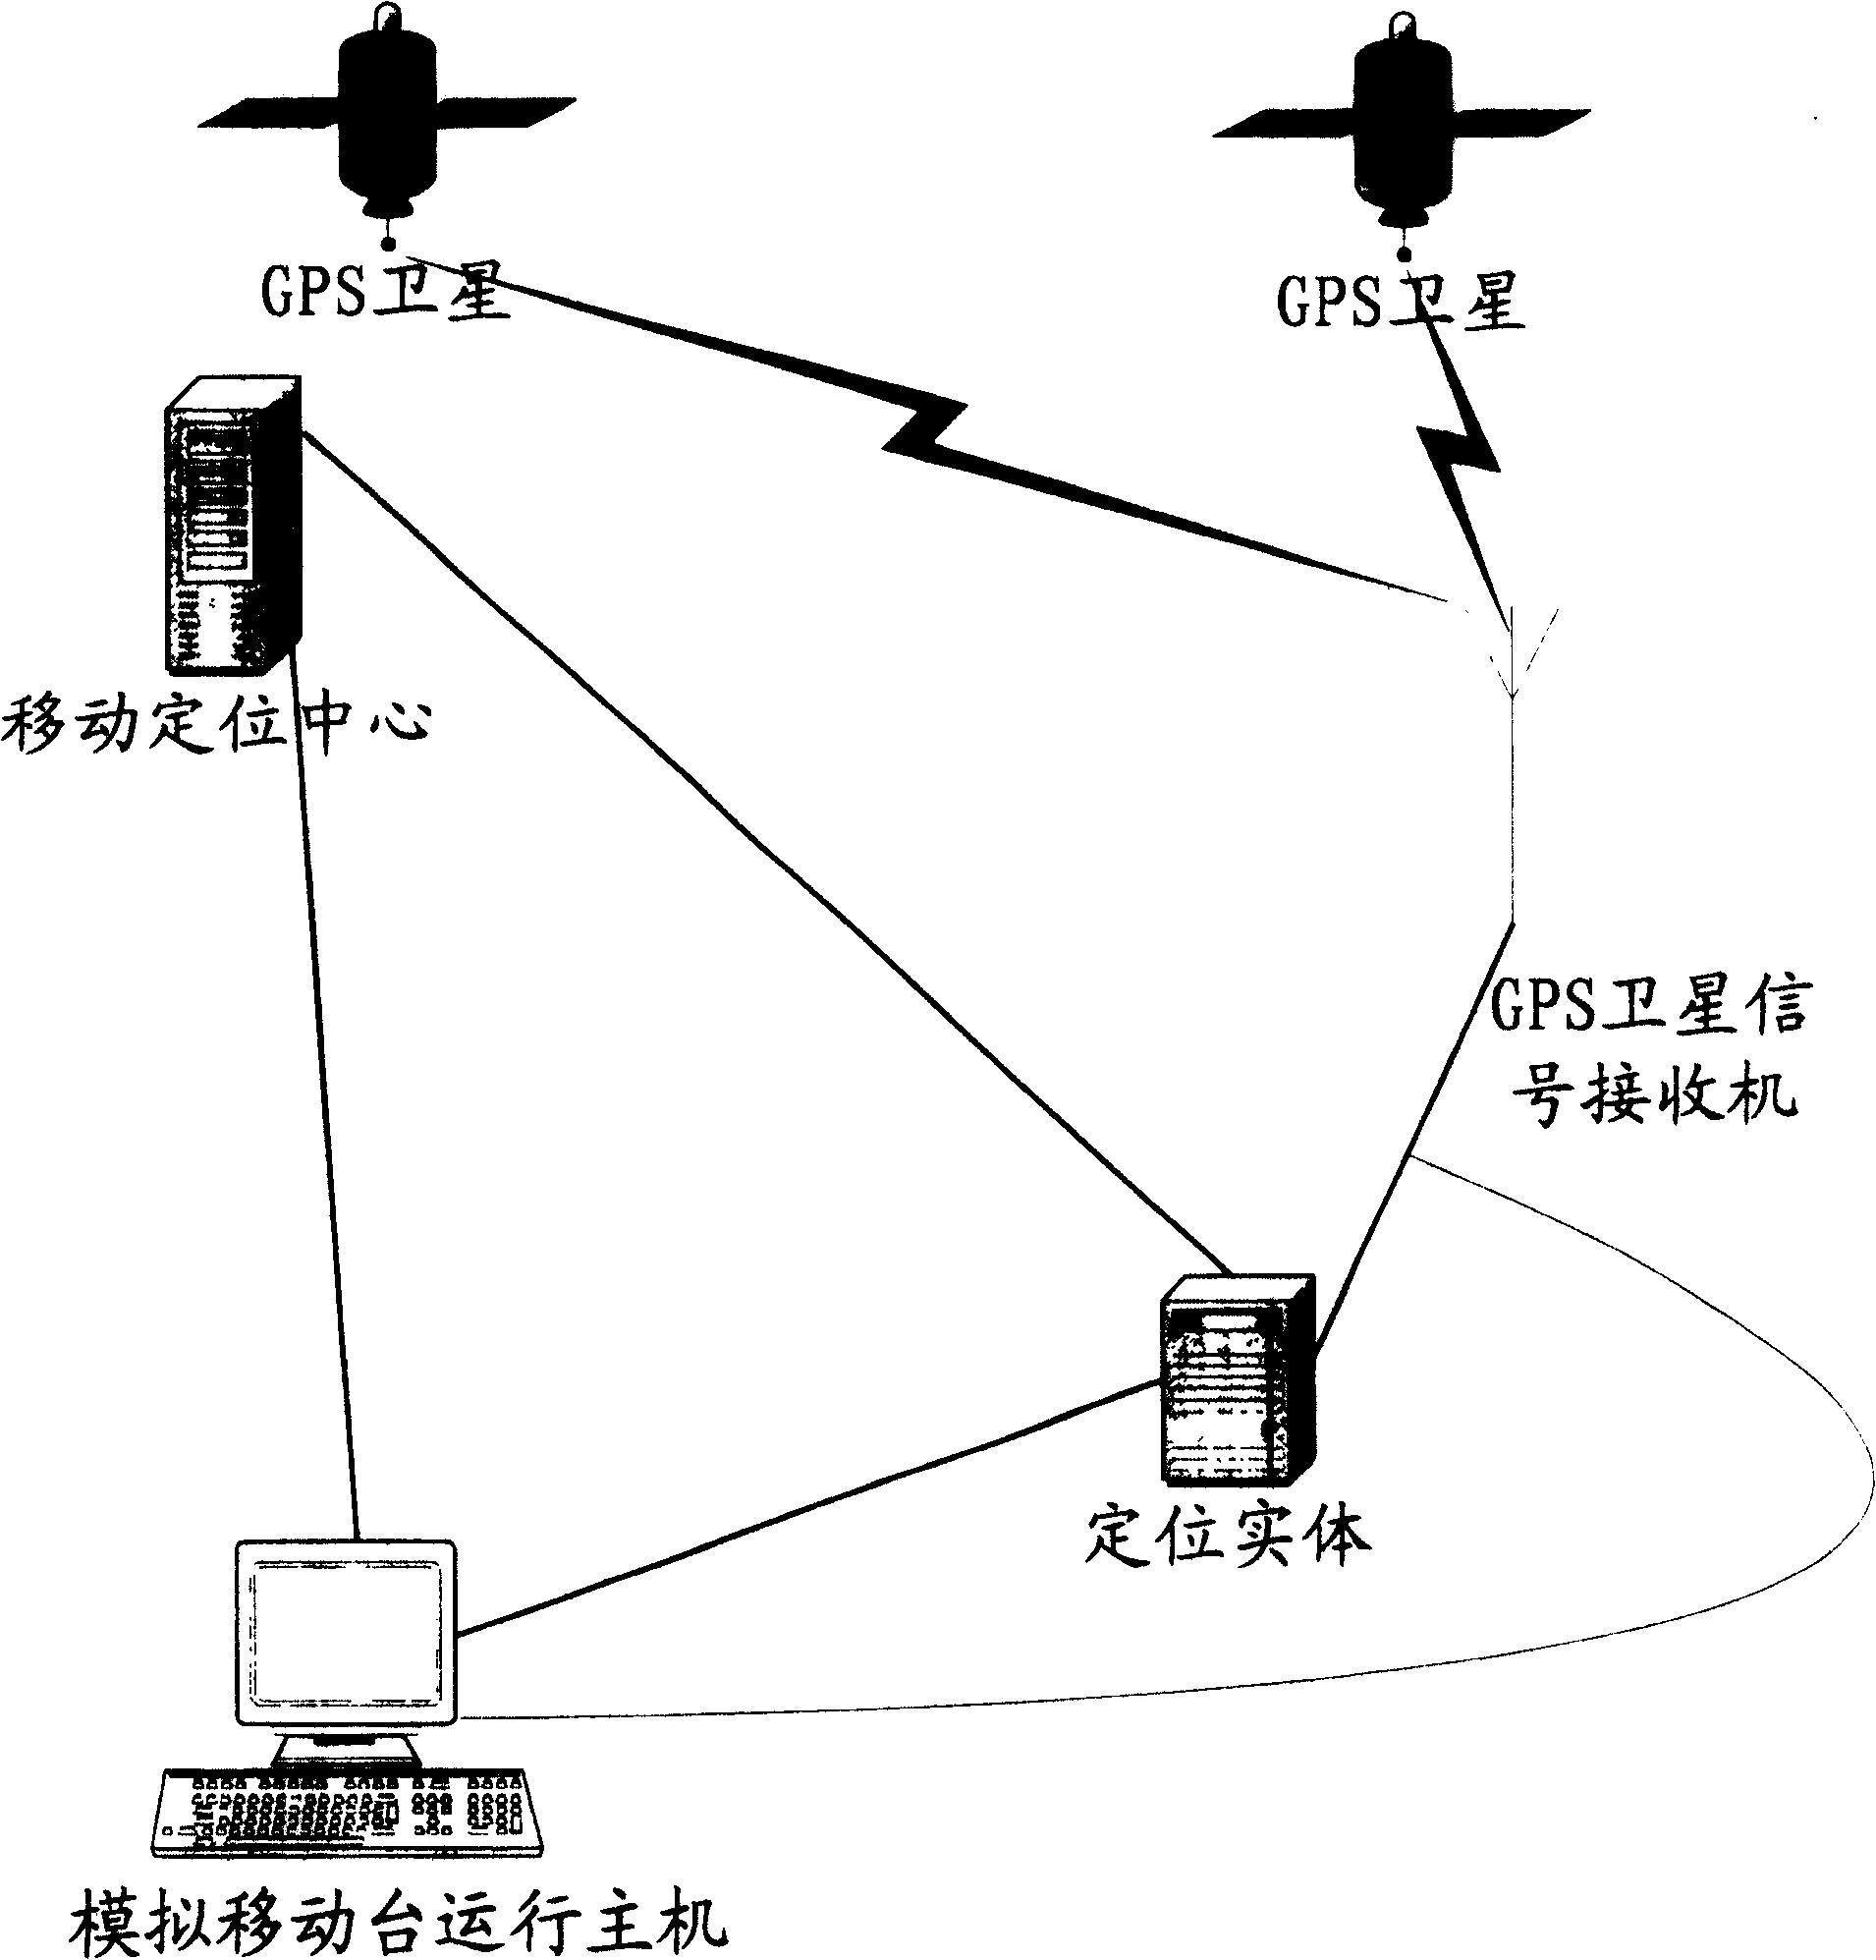 Analogue mobile station system, analogue mobile station positioning testing system and testing method